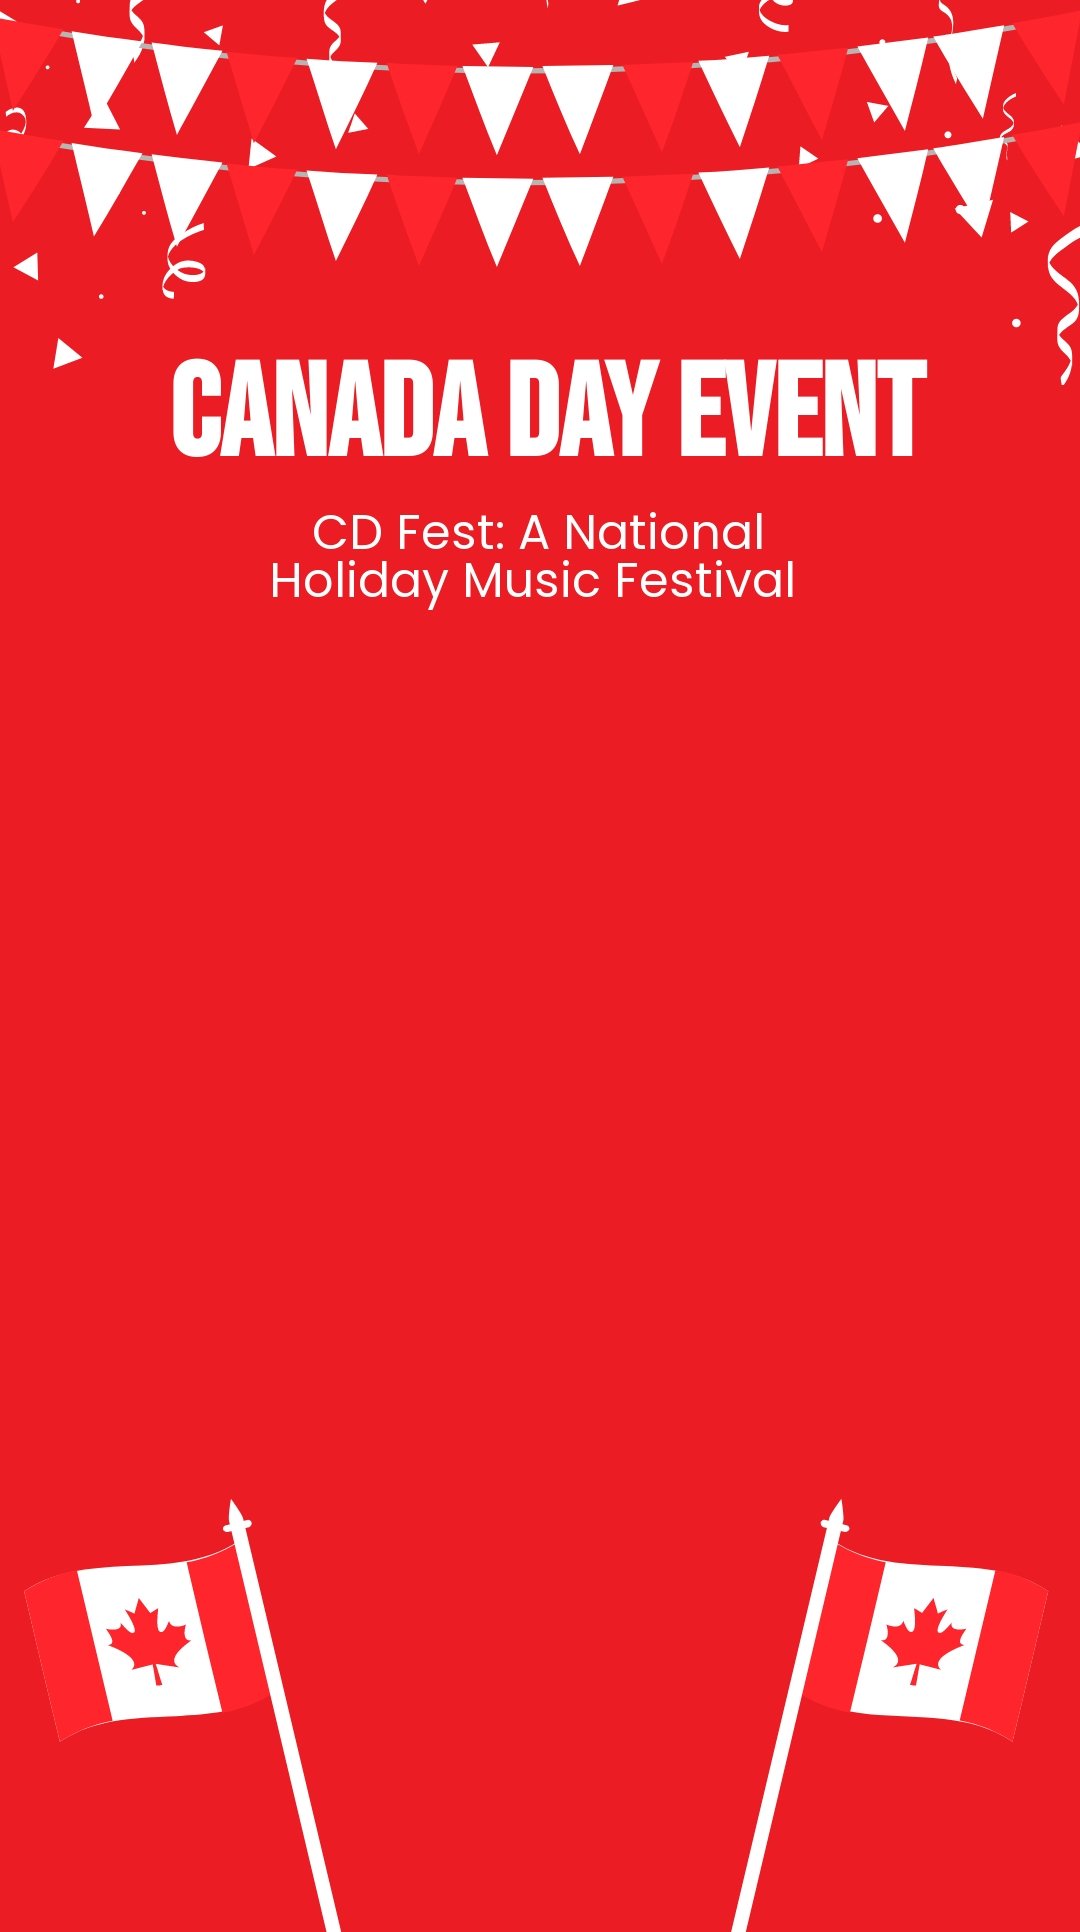 Free Canada Day Event Snapchat Geofilter Template in Illustrator, PSD